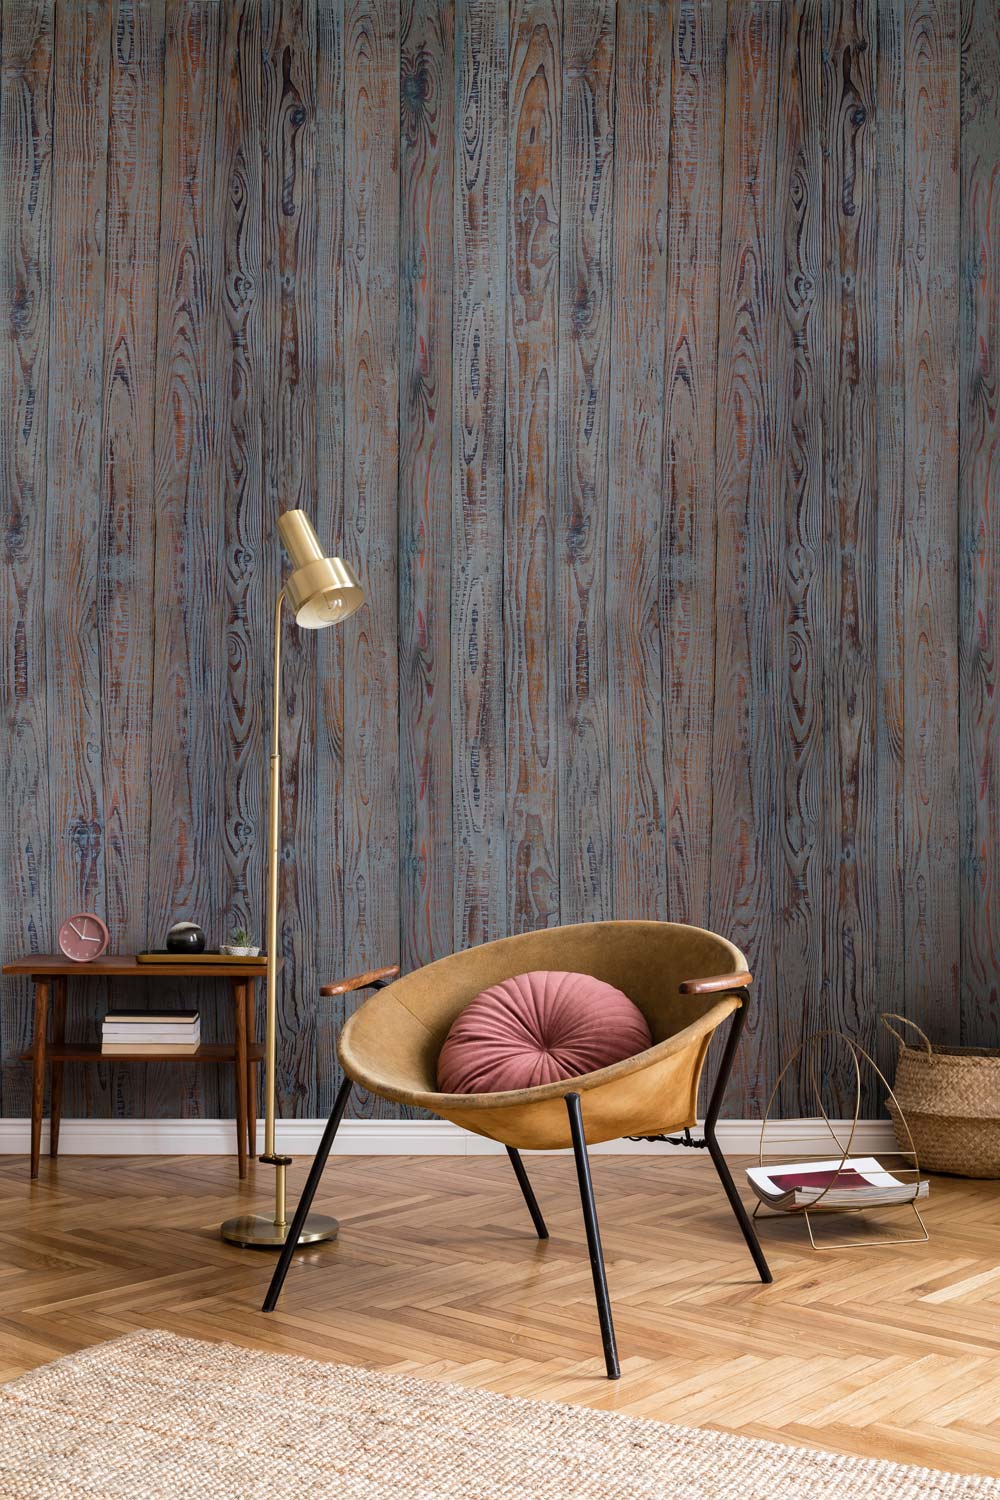 Hallway wall paintings in filthy gray with a vertical wood grain pattern.